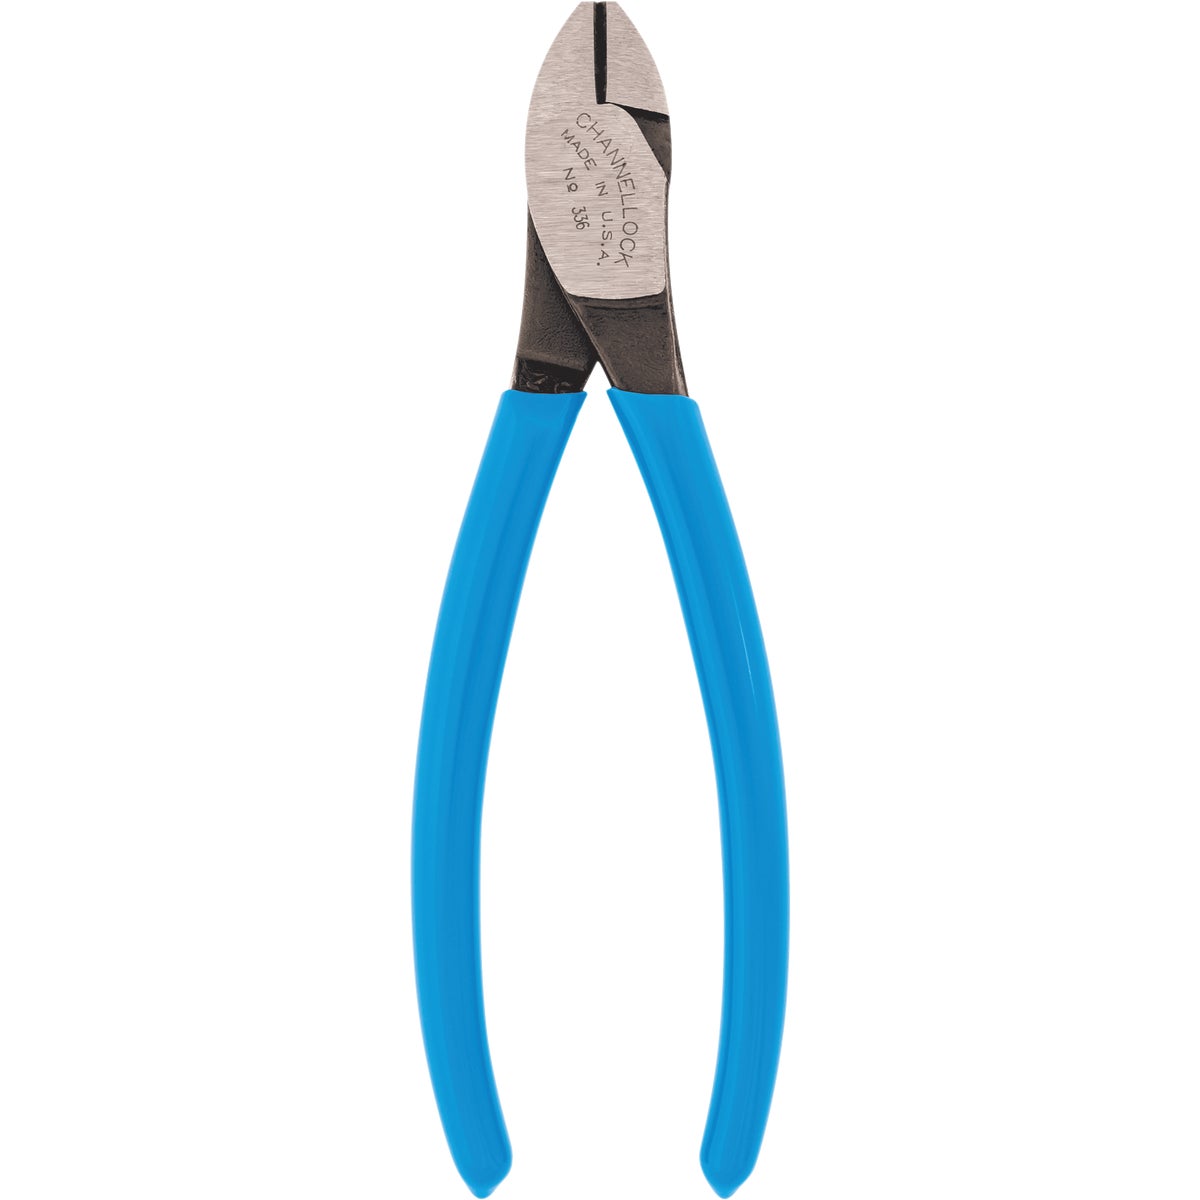 Channellock 6 In. E-Series Diagonal Cutting Pliers